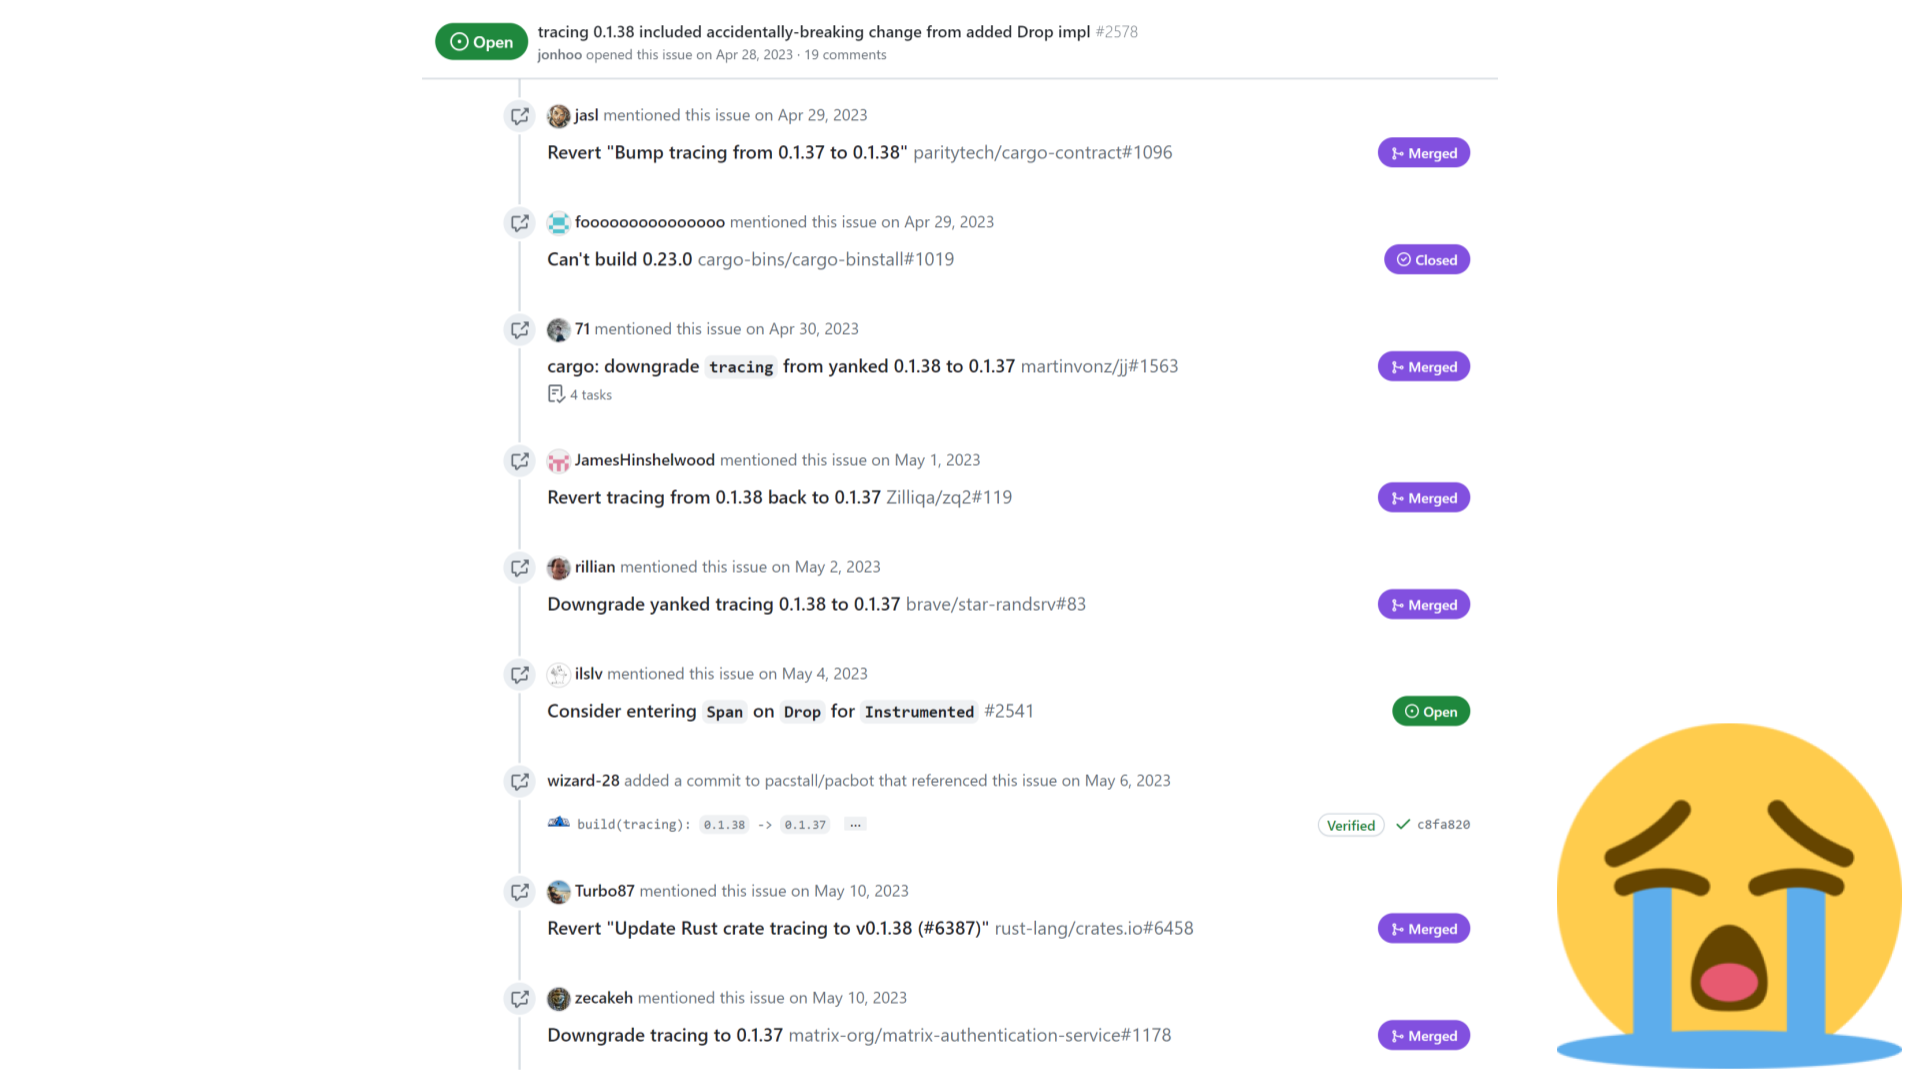 A large sobbing emoji next to the activity log on a GitHub issue about an accidental breaking change. The activity log shows that dozens of people had to make changes to their own projects to rectify the breakage. Items in the activity log have titles like "Can't build 0.23.0" or "Revert tracing from 0.1.38 back to 0.1.37." The screenshot shows ten such items, and UI elements indicate the activity log continues past the bottom edge of the screenshot.